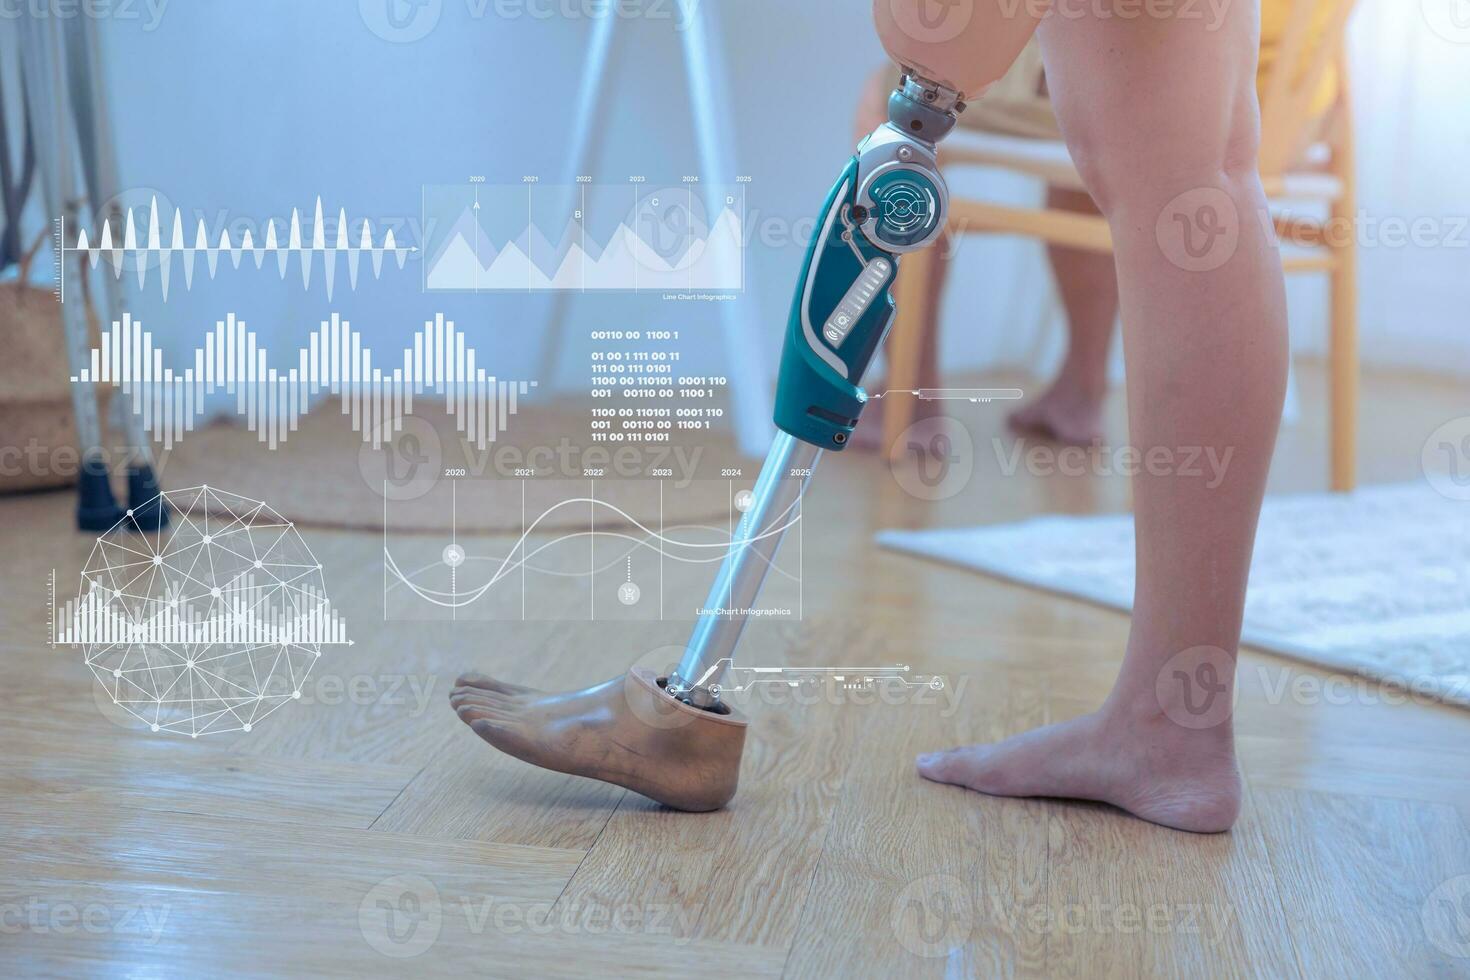 modern technology in prosthetic leg for disability people. robotic artificial knee joint bionic limb with data sensor overlay graphic photo